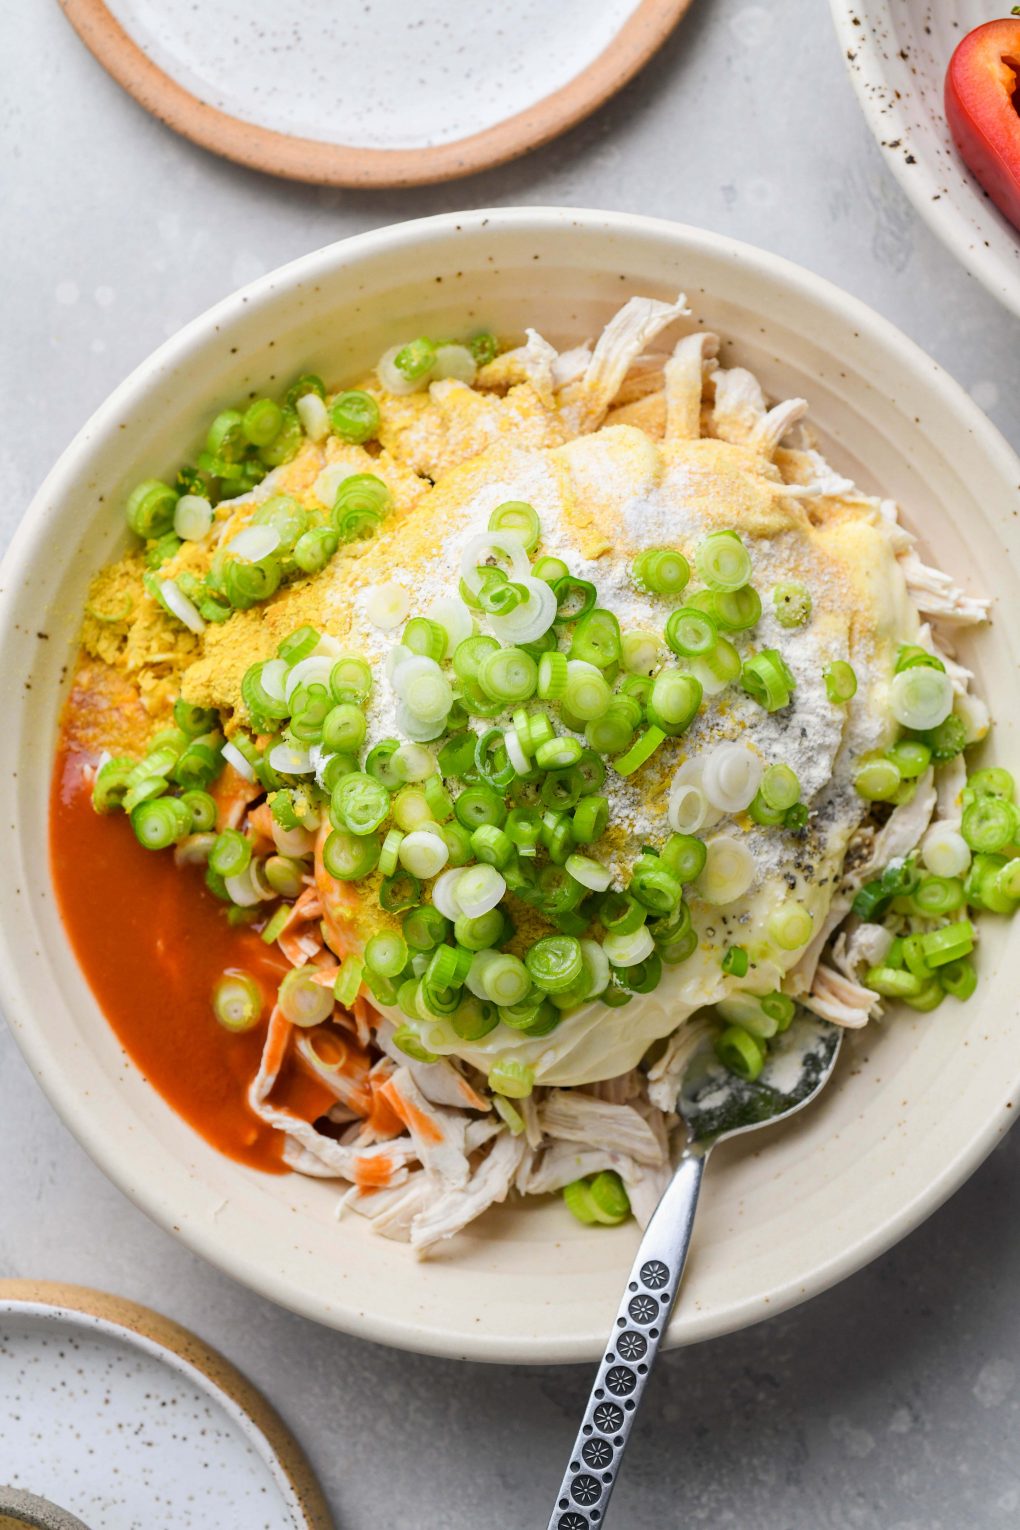 Image of a large bowl filled with the ingredients for buffalo shredded chicken - shredded chicken, mayo, green onions, hot sauce, and spices.